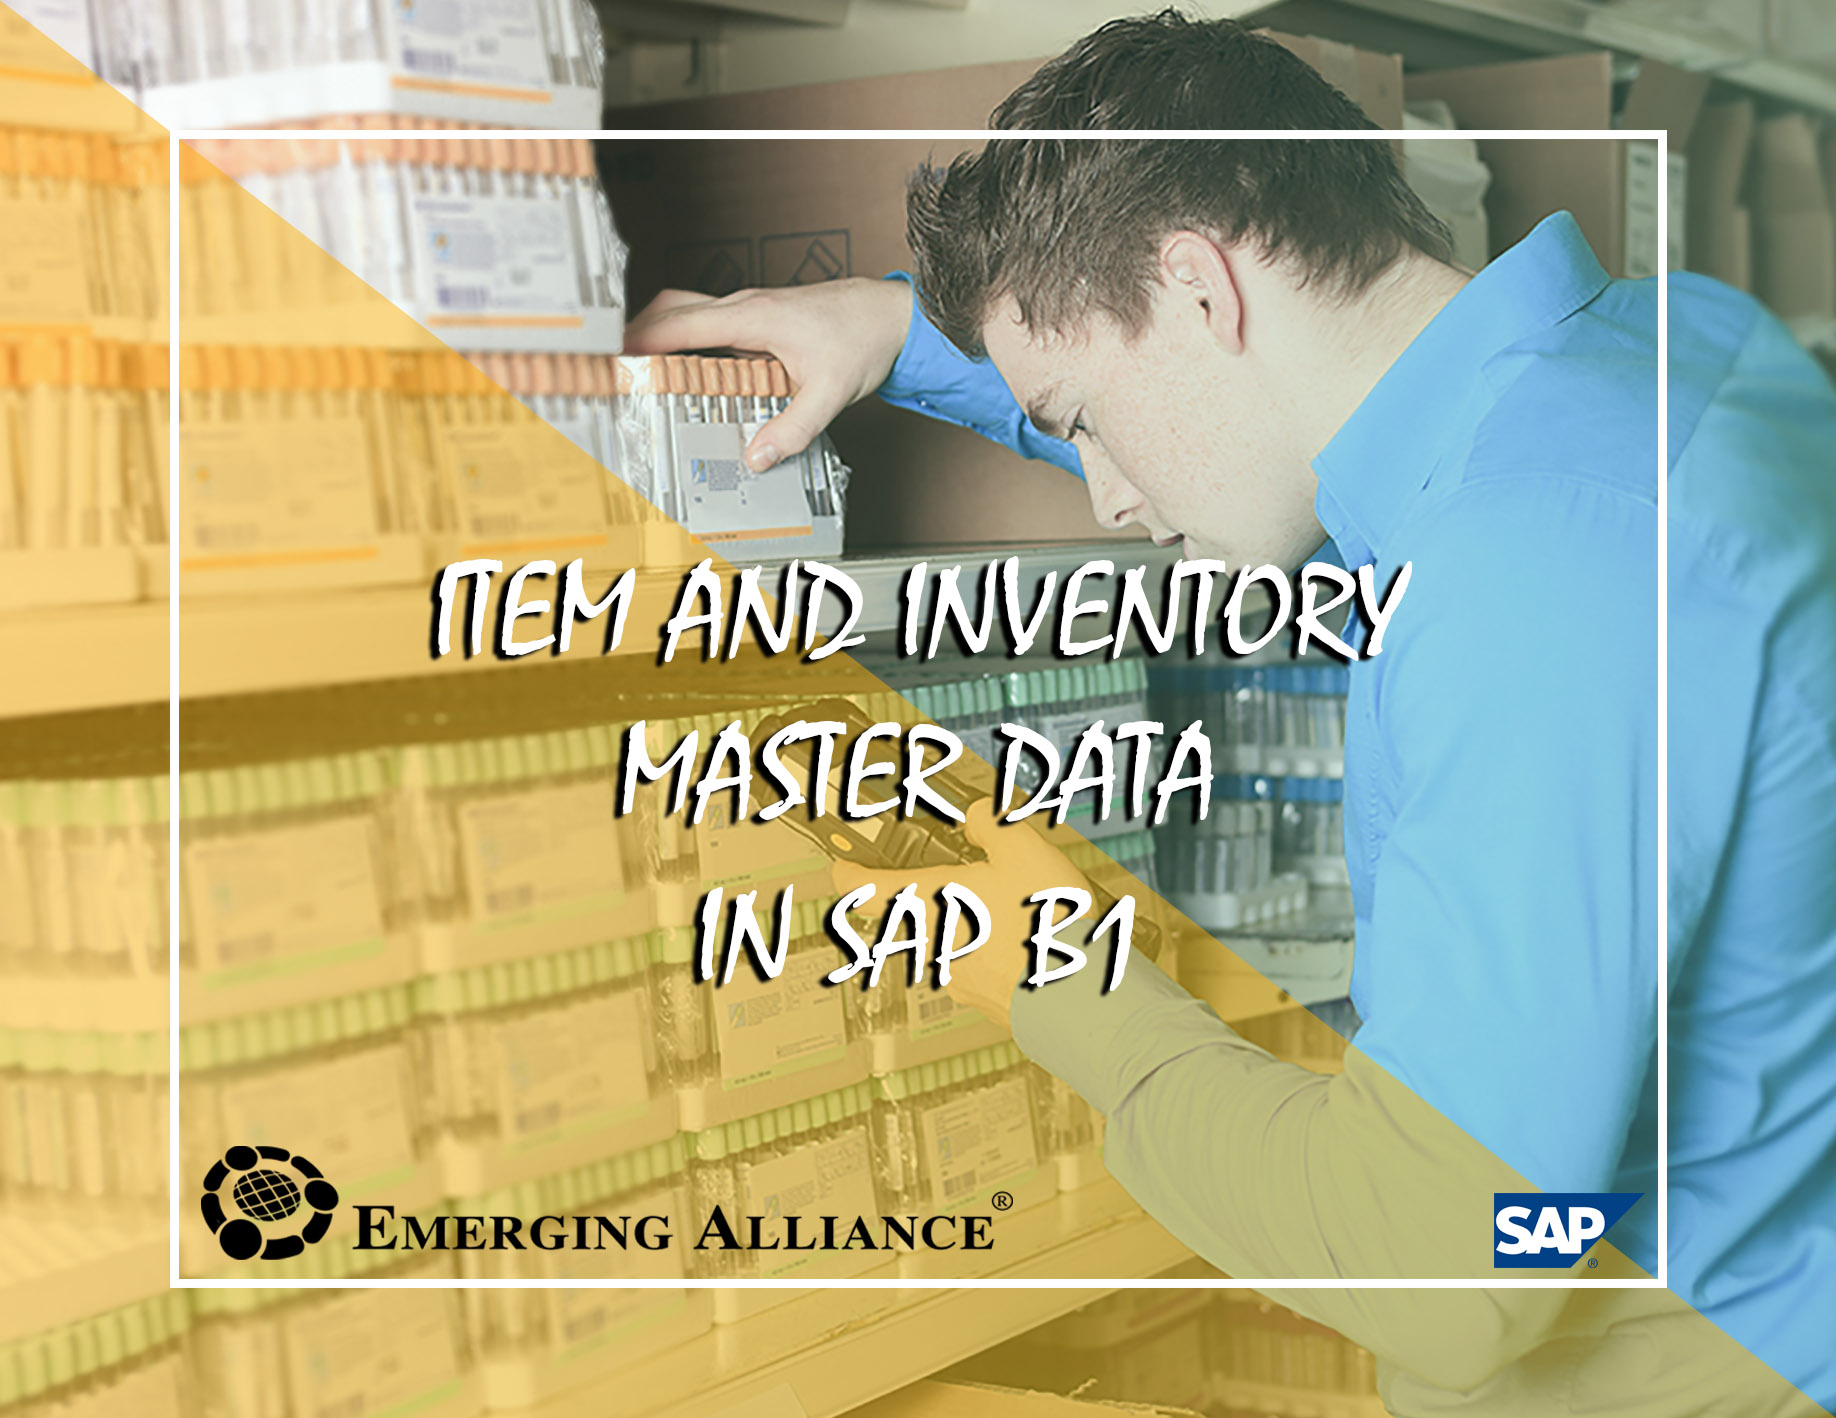 item and inventory master data in sap business one